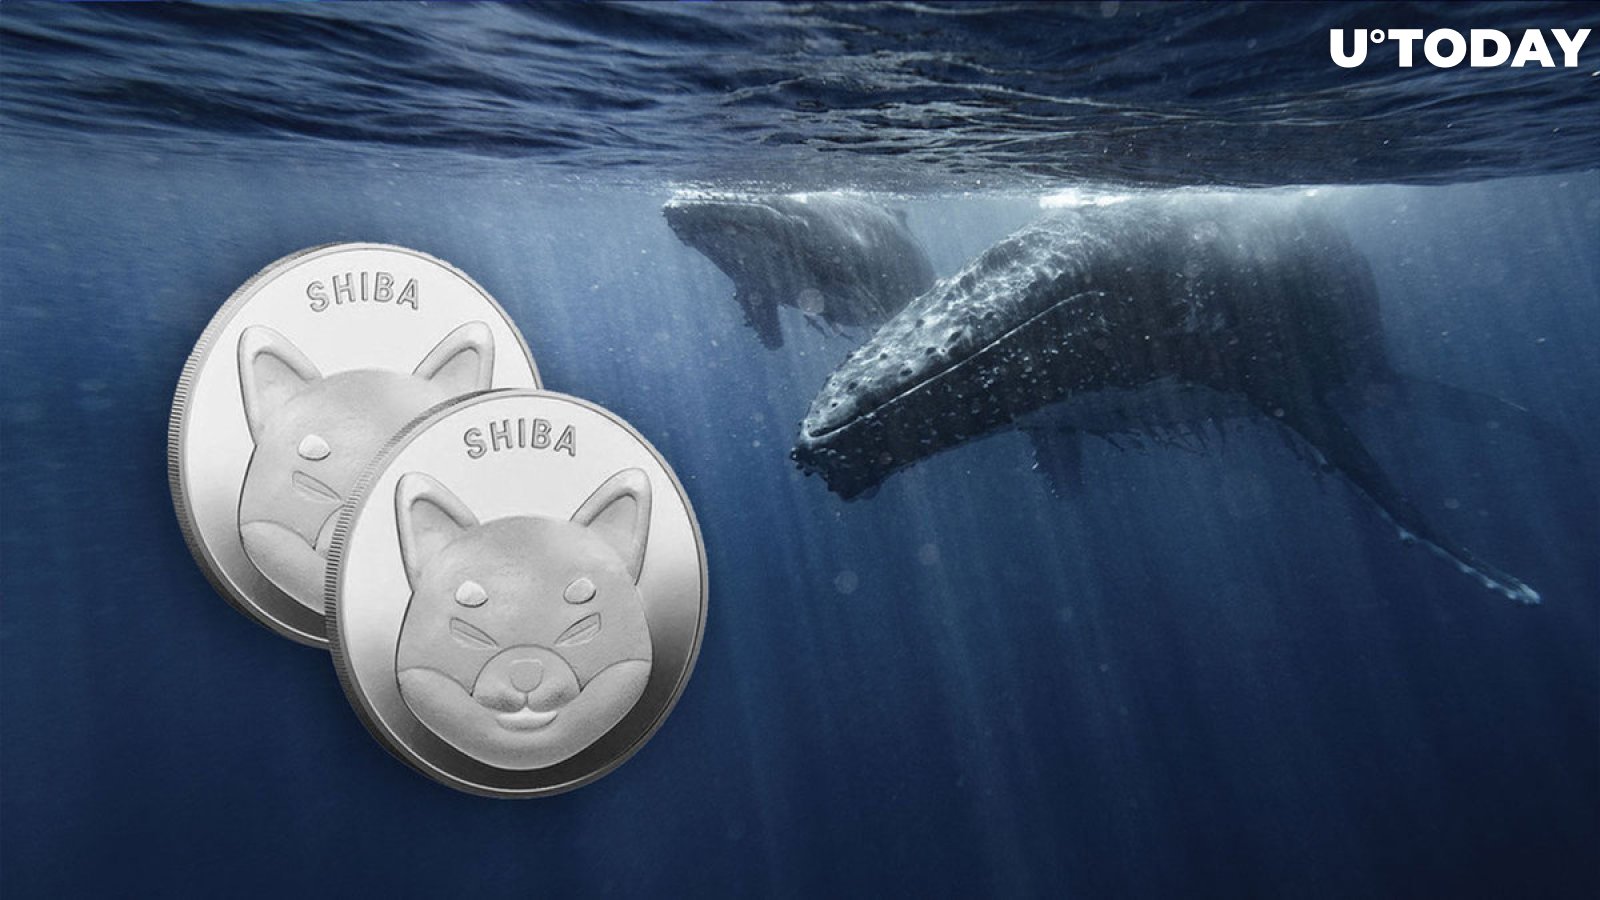 1.7 Trillion SHIB Bought by Largest Whales in Last 7 Days: Details